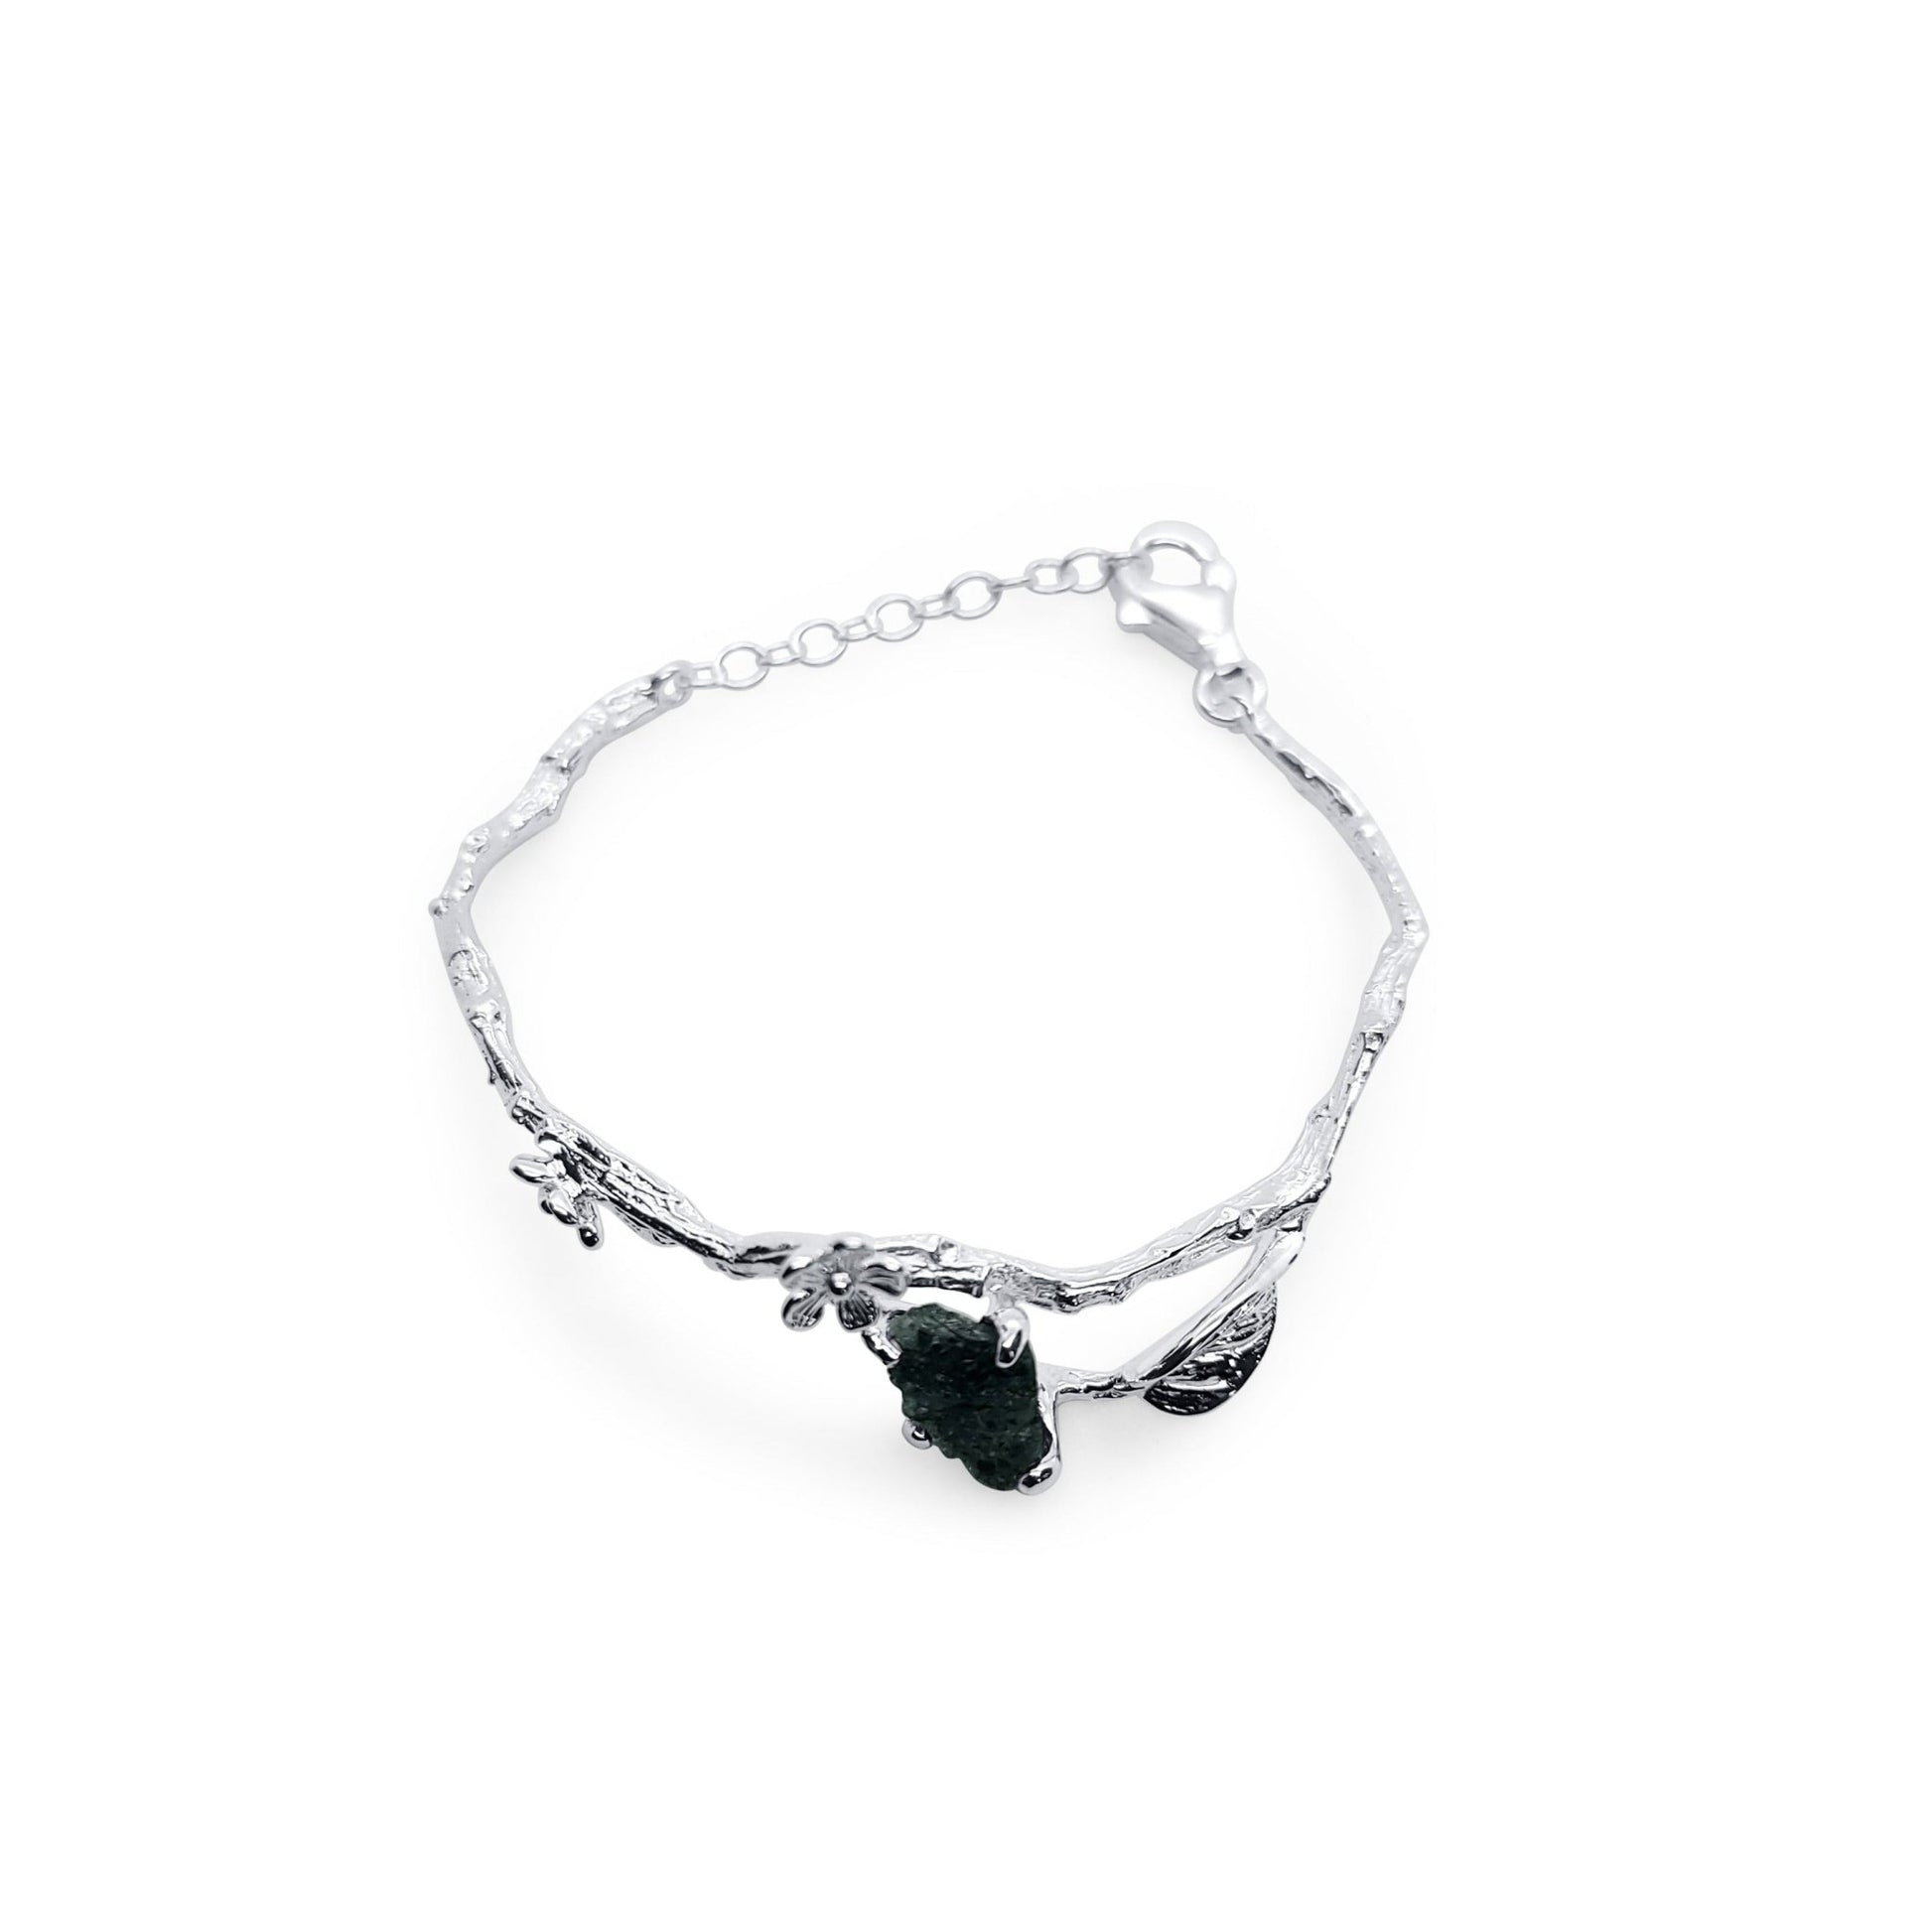 one of a kind silver branch bracelet with silver flowers, leaves and natural raw emerald stone and adjustable closure